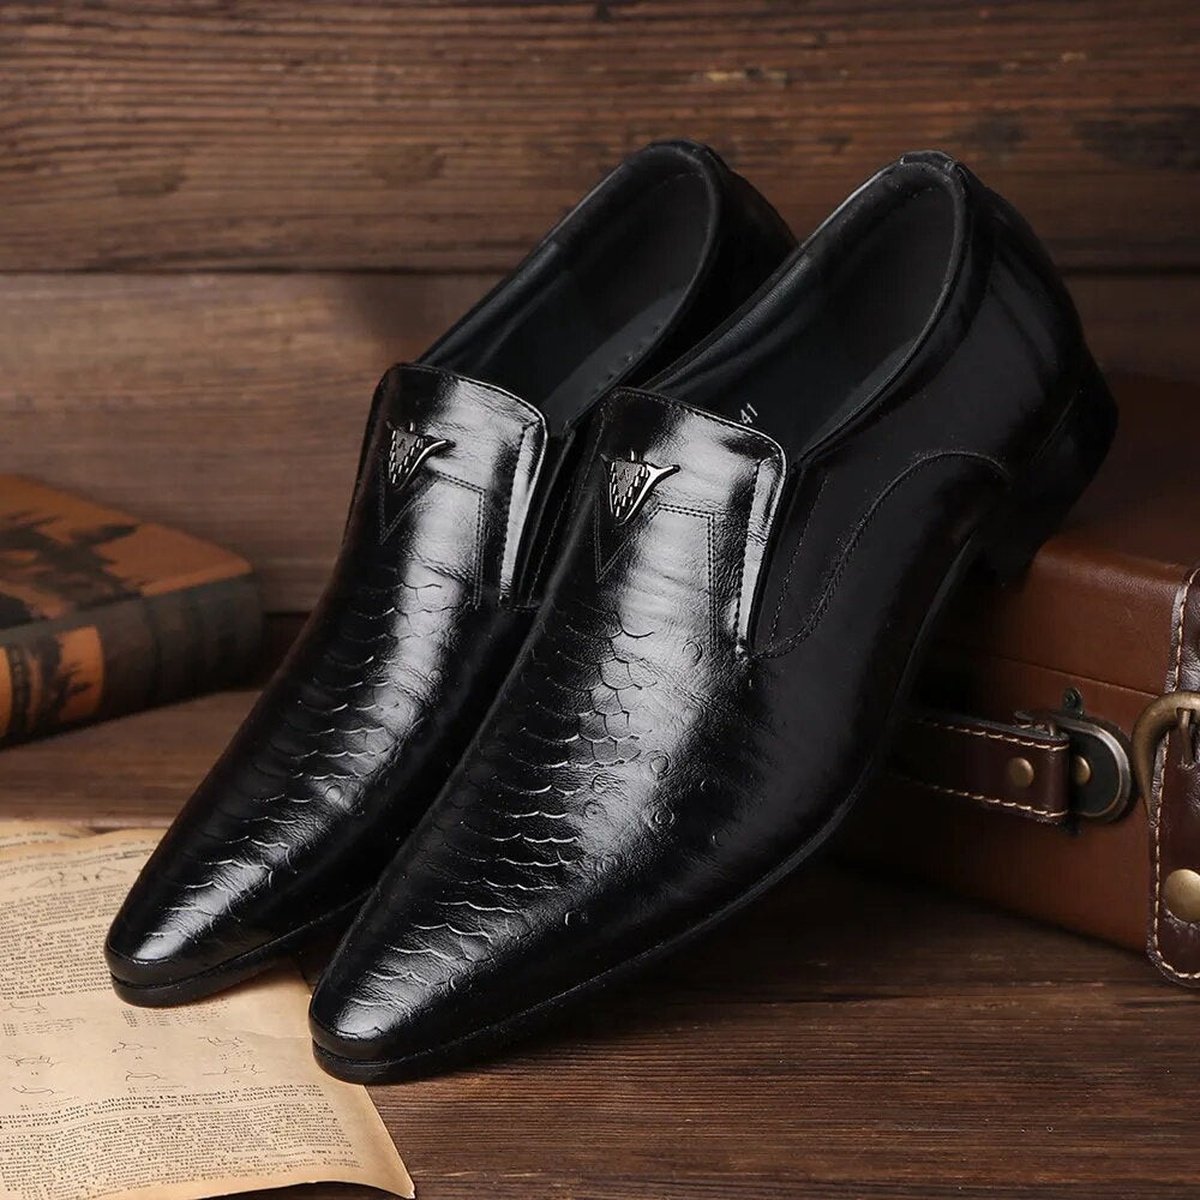 Retro Men's Dress Shoes with Pointed Toe & Slip-on Loafers